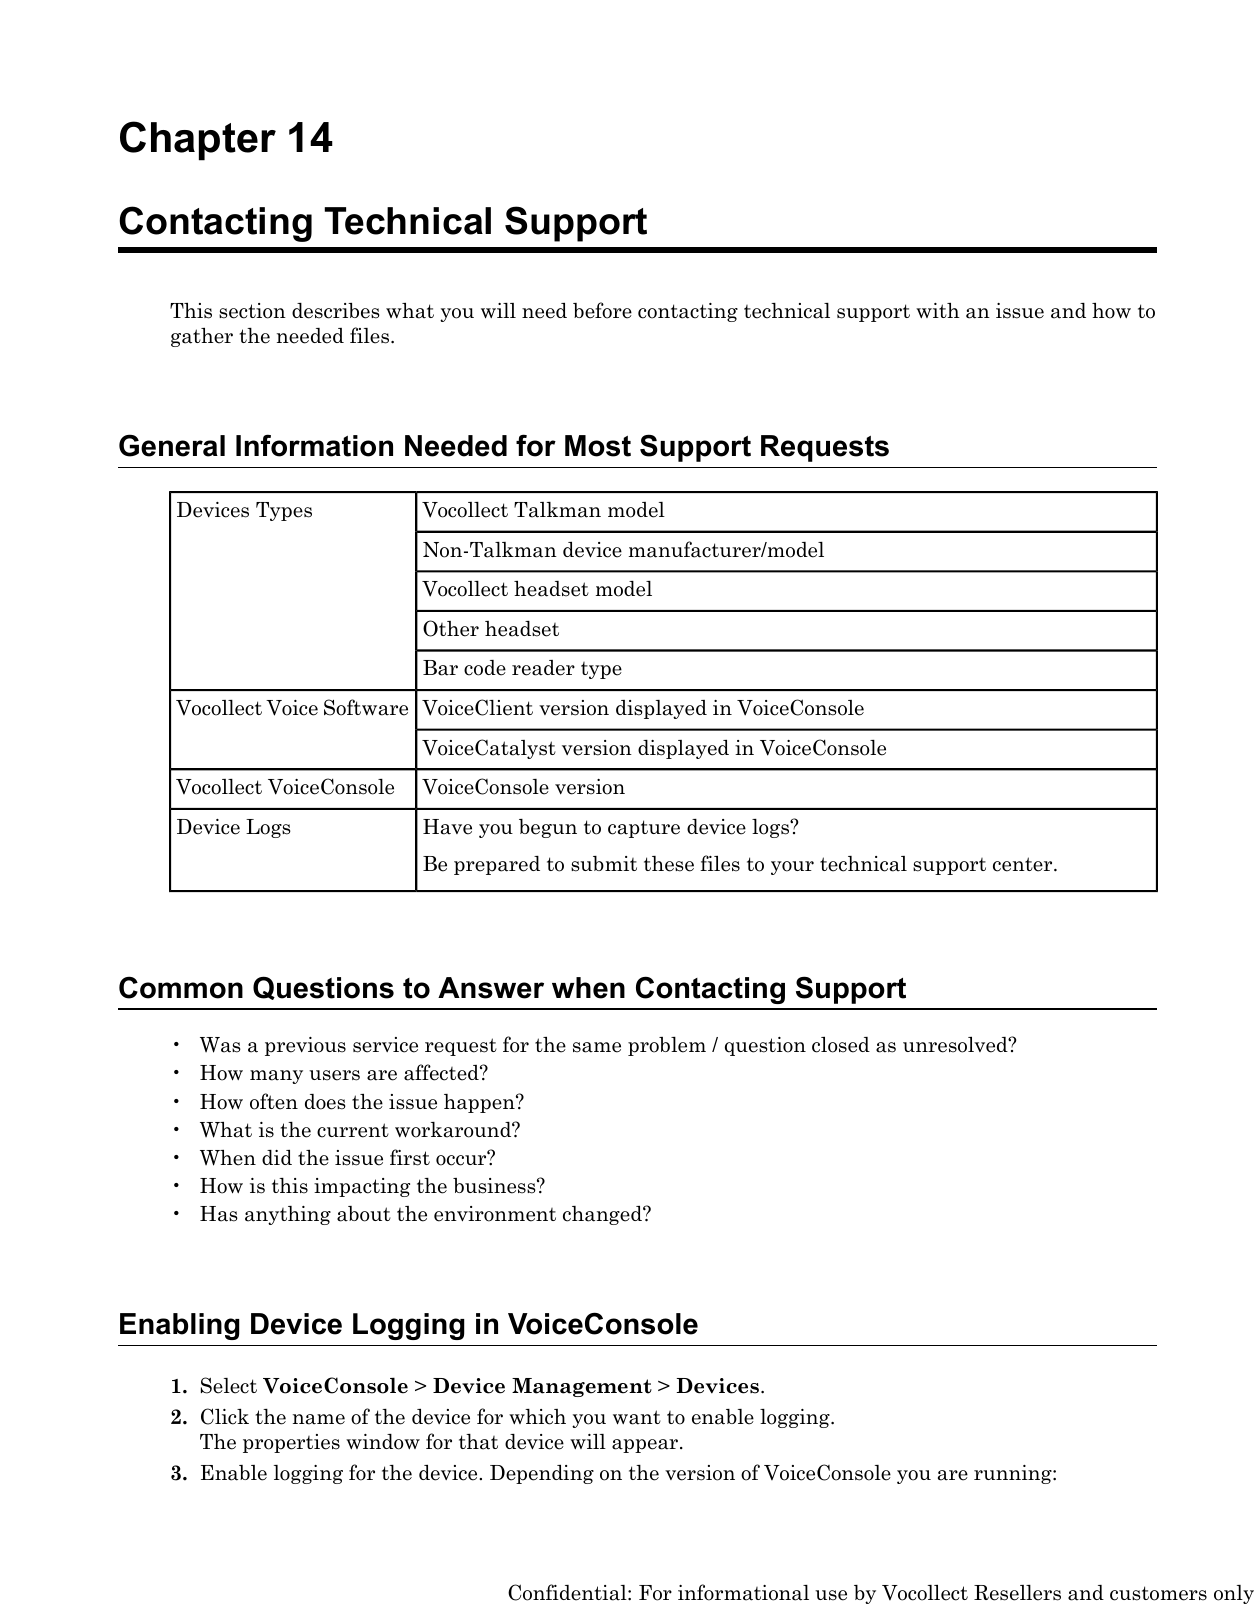 Chapter 14Contacting Technical SupportThis section describes what you will need before contacting technical support with an issue and how togather the needed files.General Information Needed for Most Support RequestsVocollect Talkman modelDevices TypesNon-Talkman device manufacturer/modelVocollect headset modelOther headsetBar code reader typeVoiceClient version displayed in VoiceConsoleVocollect Voice SoftwareVoiceCatalyst version displayed in VoiceConsoleVoiceConsole versionVocollect VoiceConsoleHave you begun to capture device logs?Be prepared to submit these files to your technical support center.Device LogsCommon Questions to Answer when Contacting Support• Was a previous service request for the same problem / question closed as unresolved?• How many users are affected?• How often does the issue happen?• What is the current workaround?• When did the issue first occur?• How is this impacting the business?• Has anything about the environment changed?Enabling Device Logging in VoiceConsole1. Select VoiceConsole &gt;Device Management &gt;Devices.2. Click the name of the device for which you want to enable logging.The properties window for that device will appear.3. Enable logging for the device. Depending on the version of VoiceConsole you are running:Confidential: For informational use by Vocollect Resellers and customers only